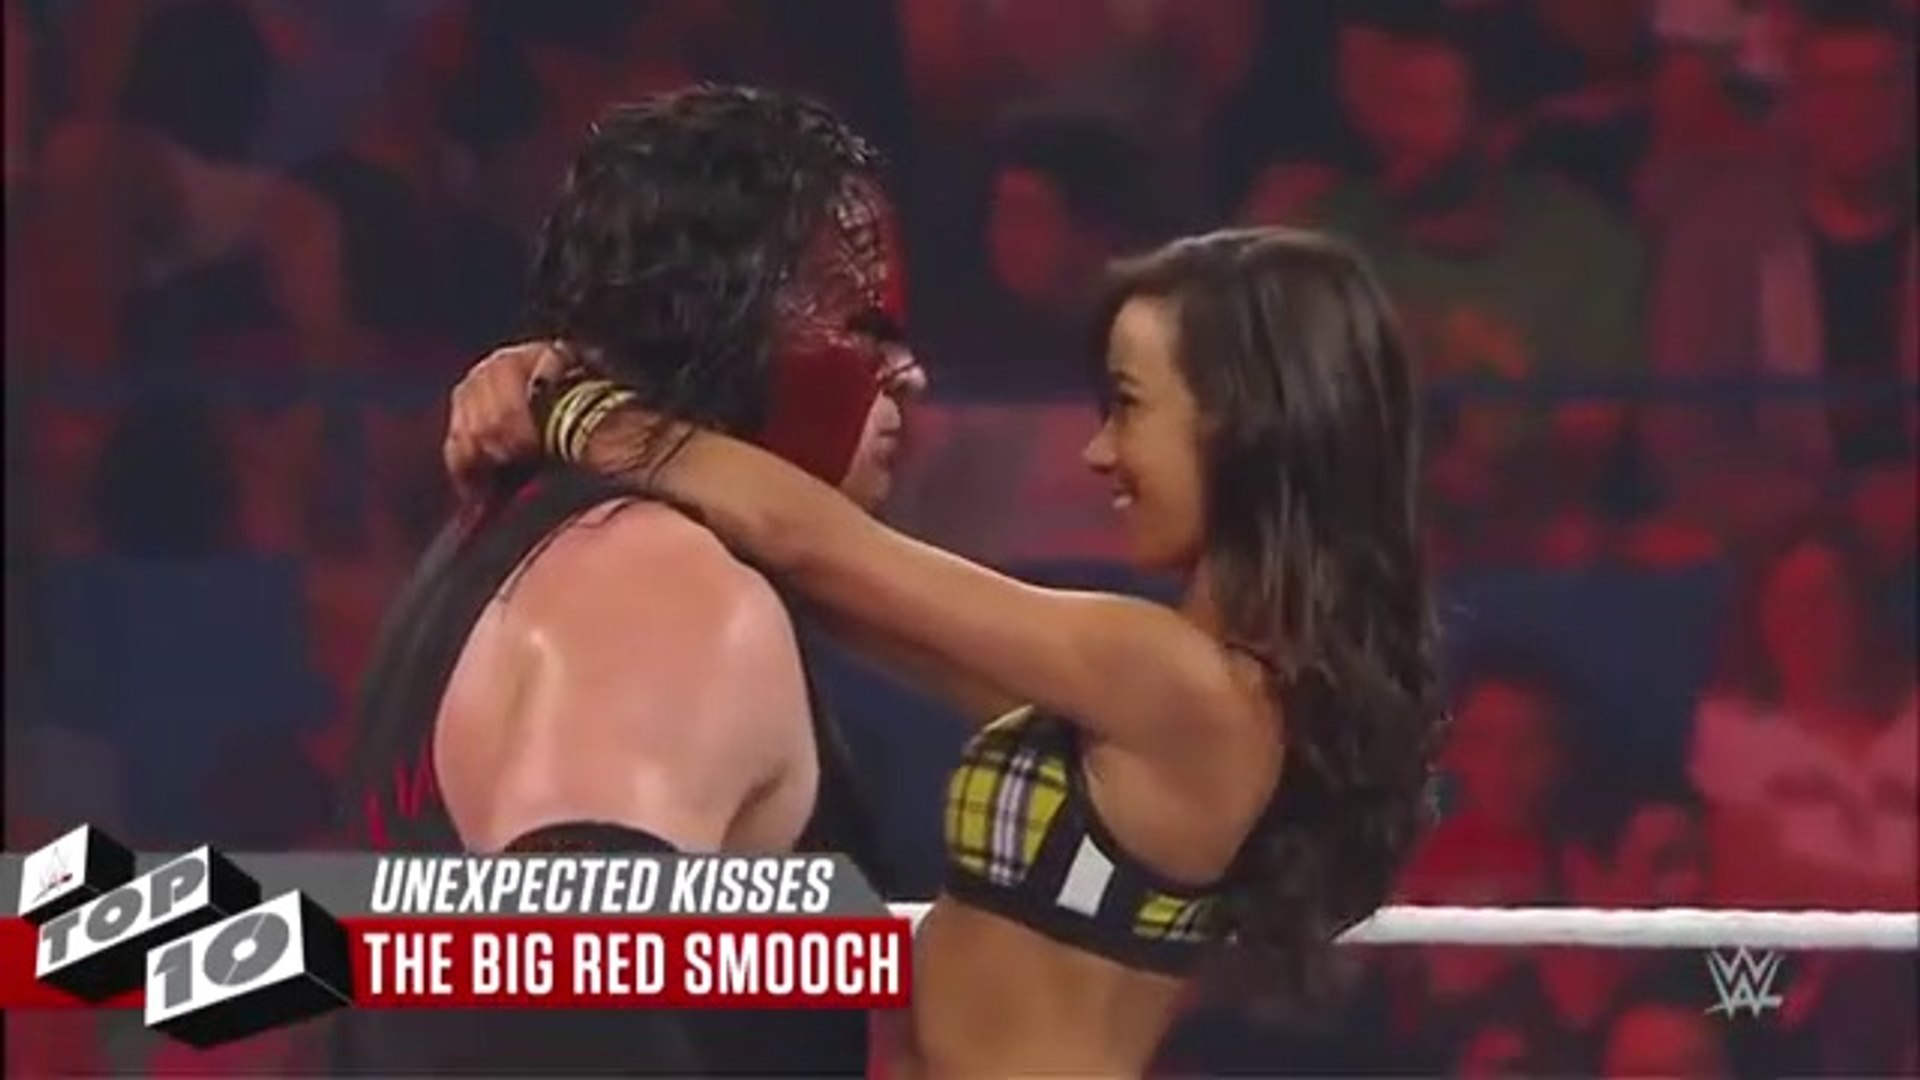 Unexpected kisses WWE Top 10 / WWE top 10 kisses - video Dailymotion